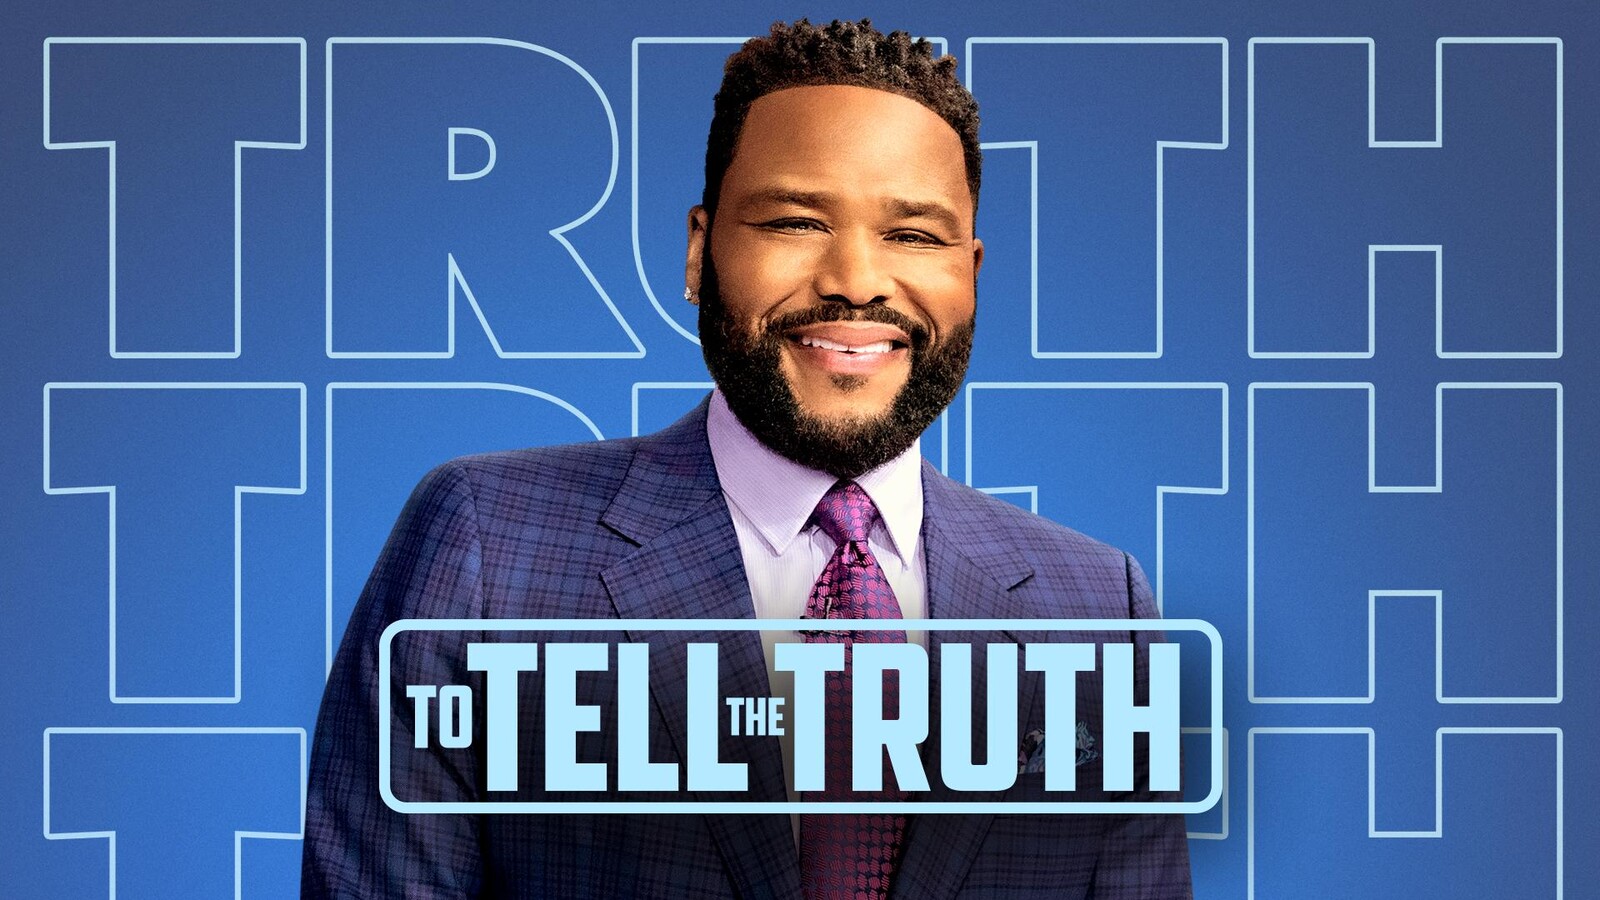 Where Can You Watch “To Tell The Truth?”